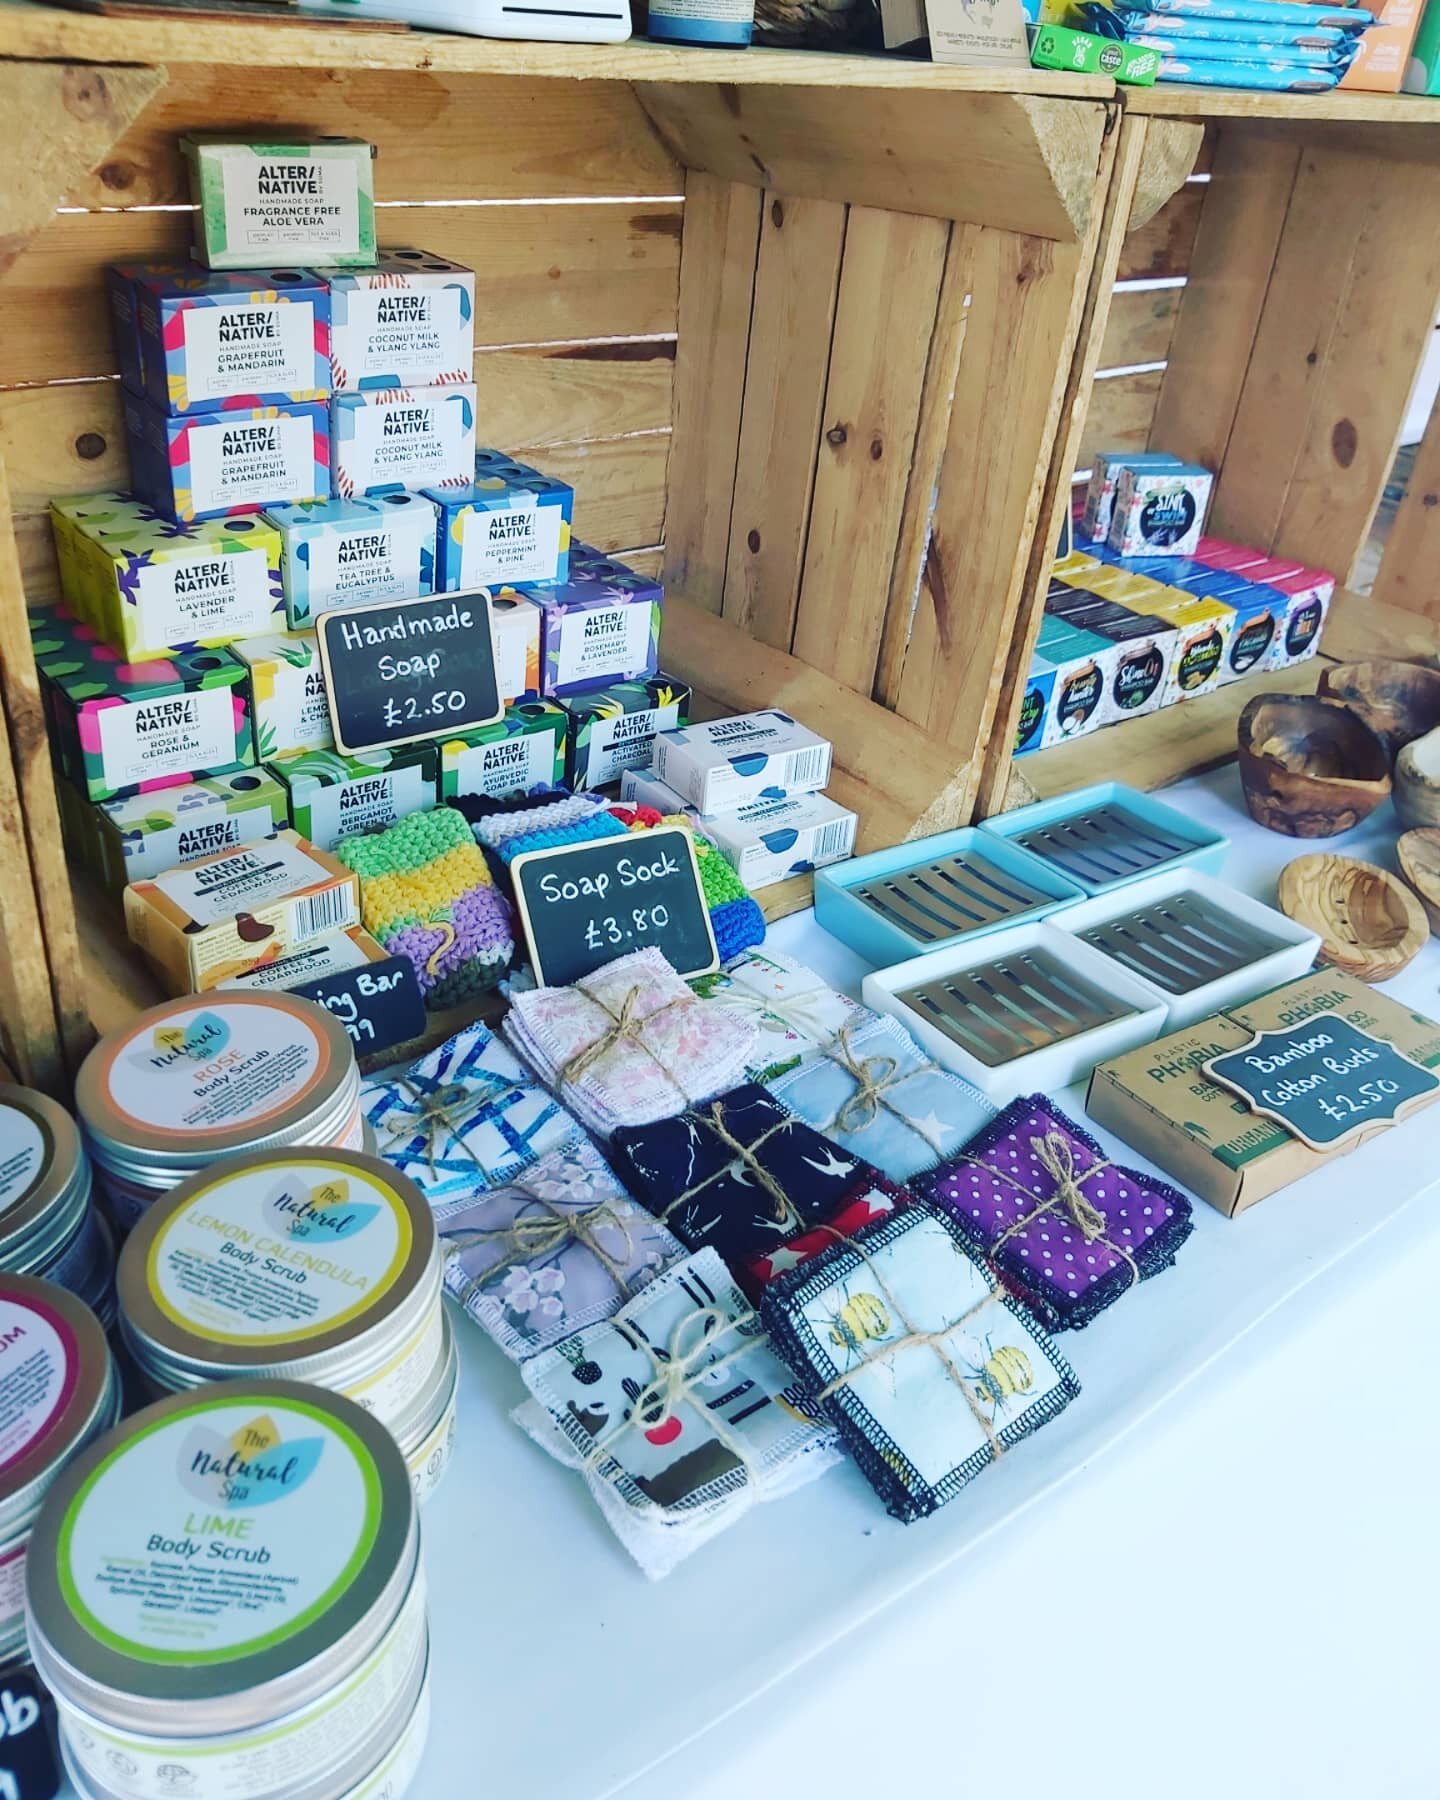 We're here at Aylesbury's @veganmarketco !  Come and say hello and check out the other stalls before we eat everything 😋

#eco #ecofriendly #sustainable #sustainability #recycle #zerowaste #plasticfree #nature #environment #green #handmade #vegan #g